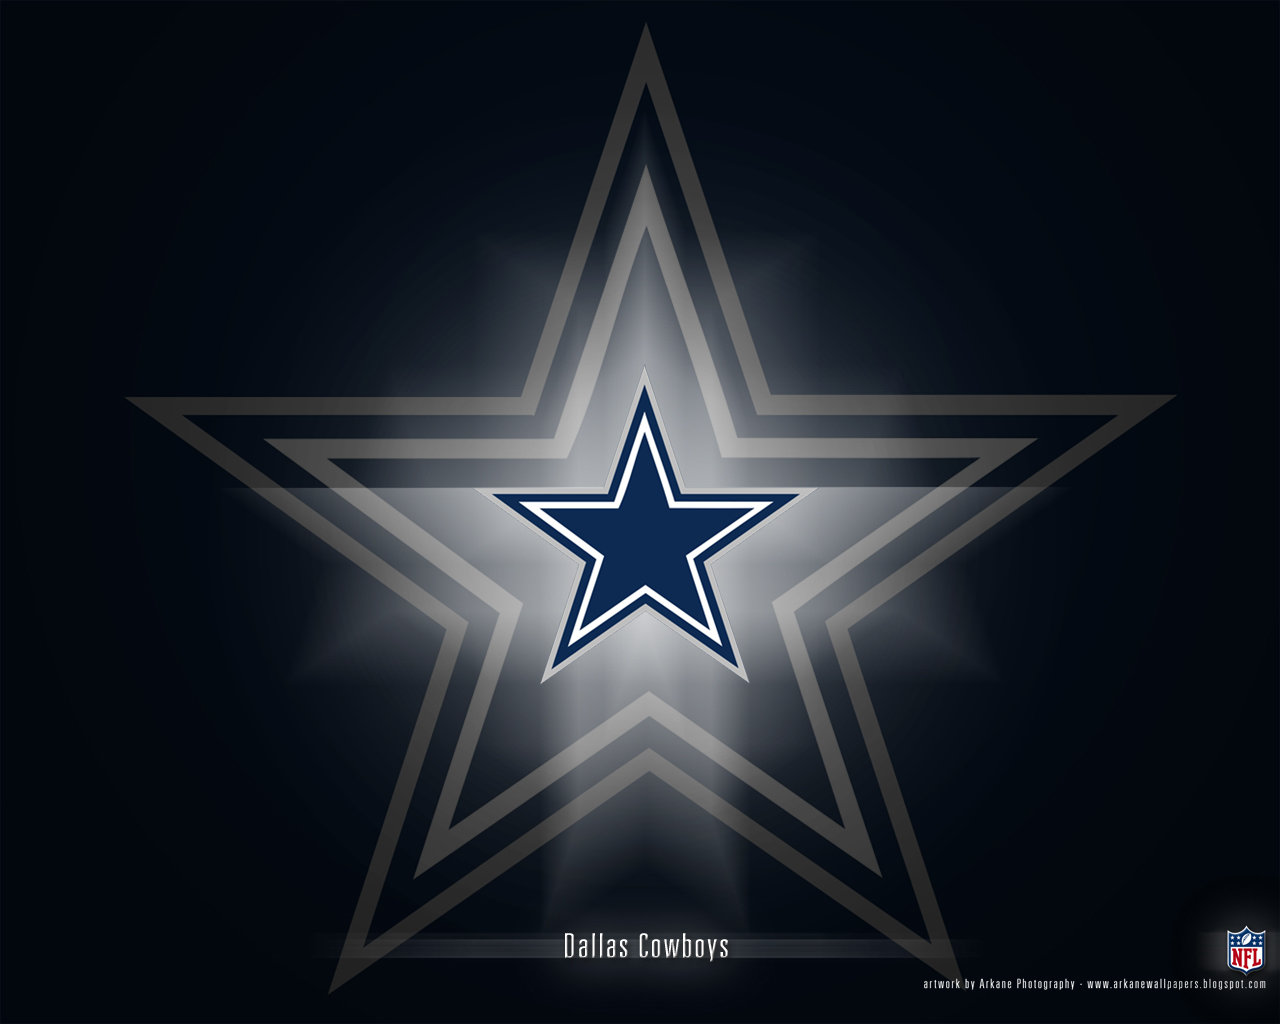 Awesome Dallas Cowboys Wallpaper Id For HD